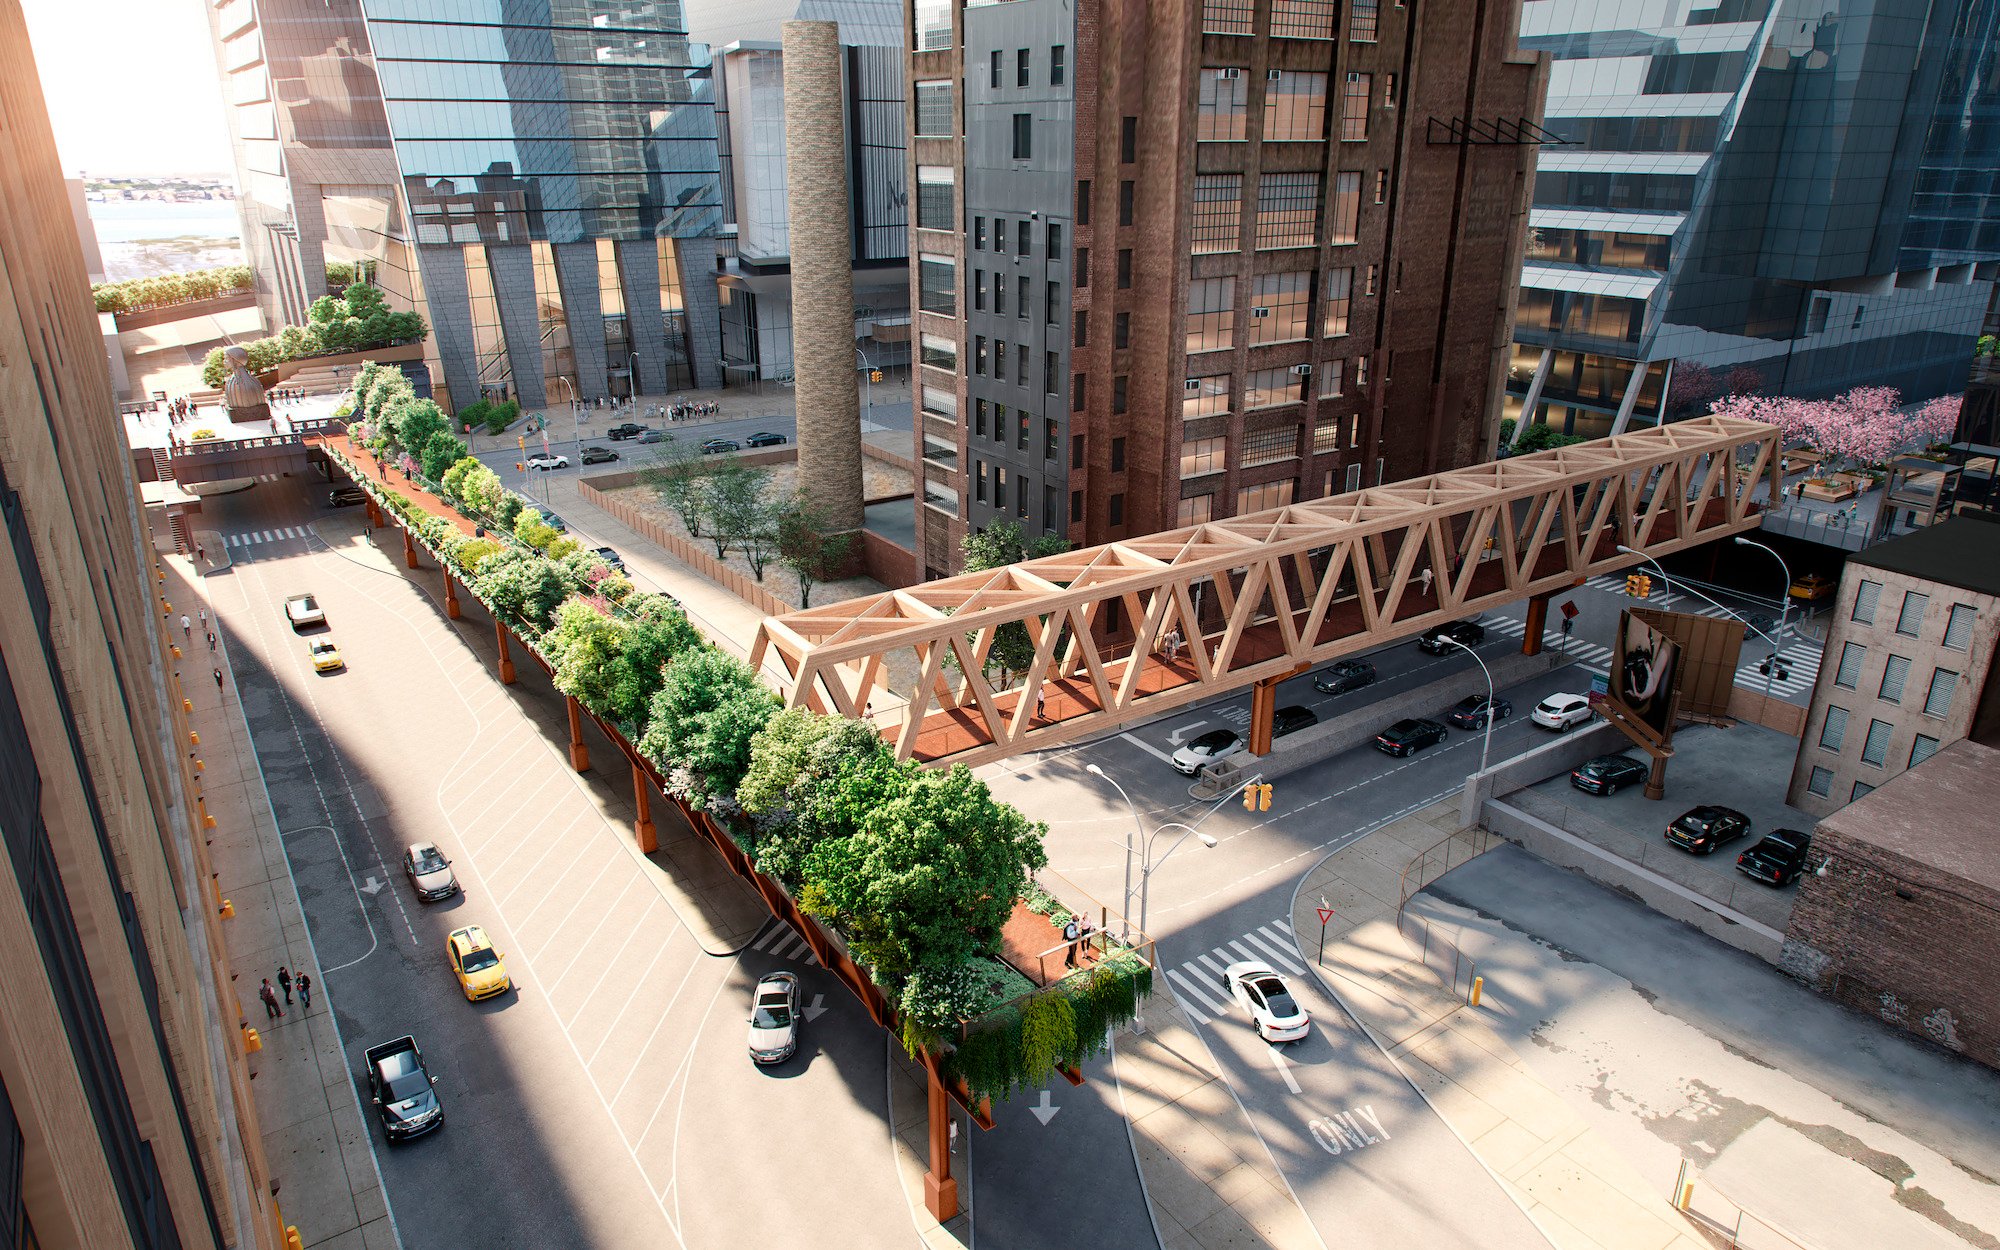 The New York High Line officially open